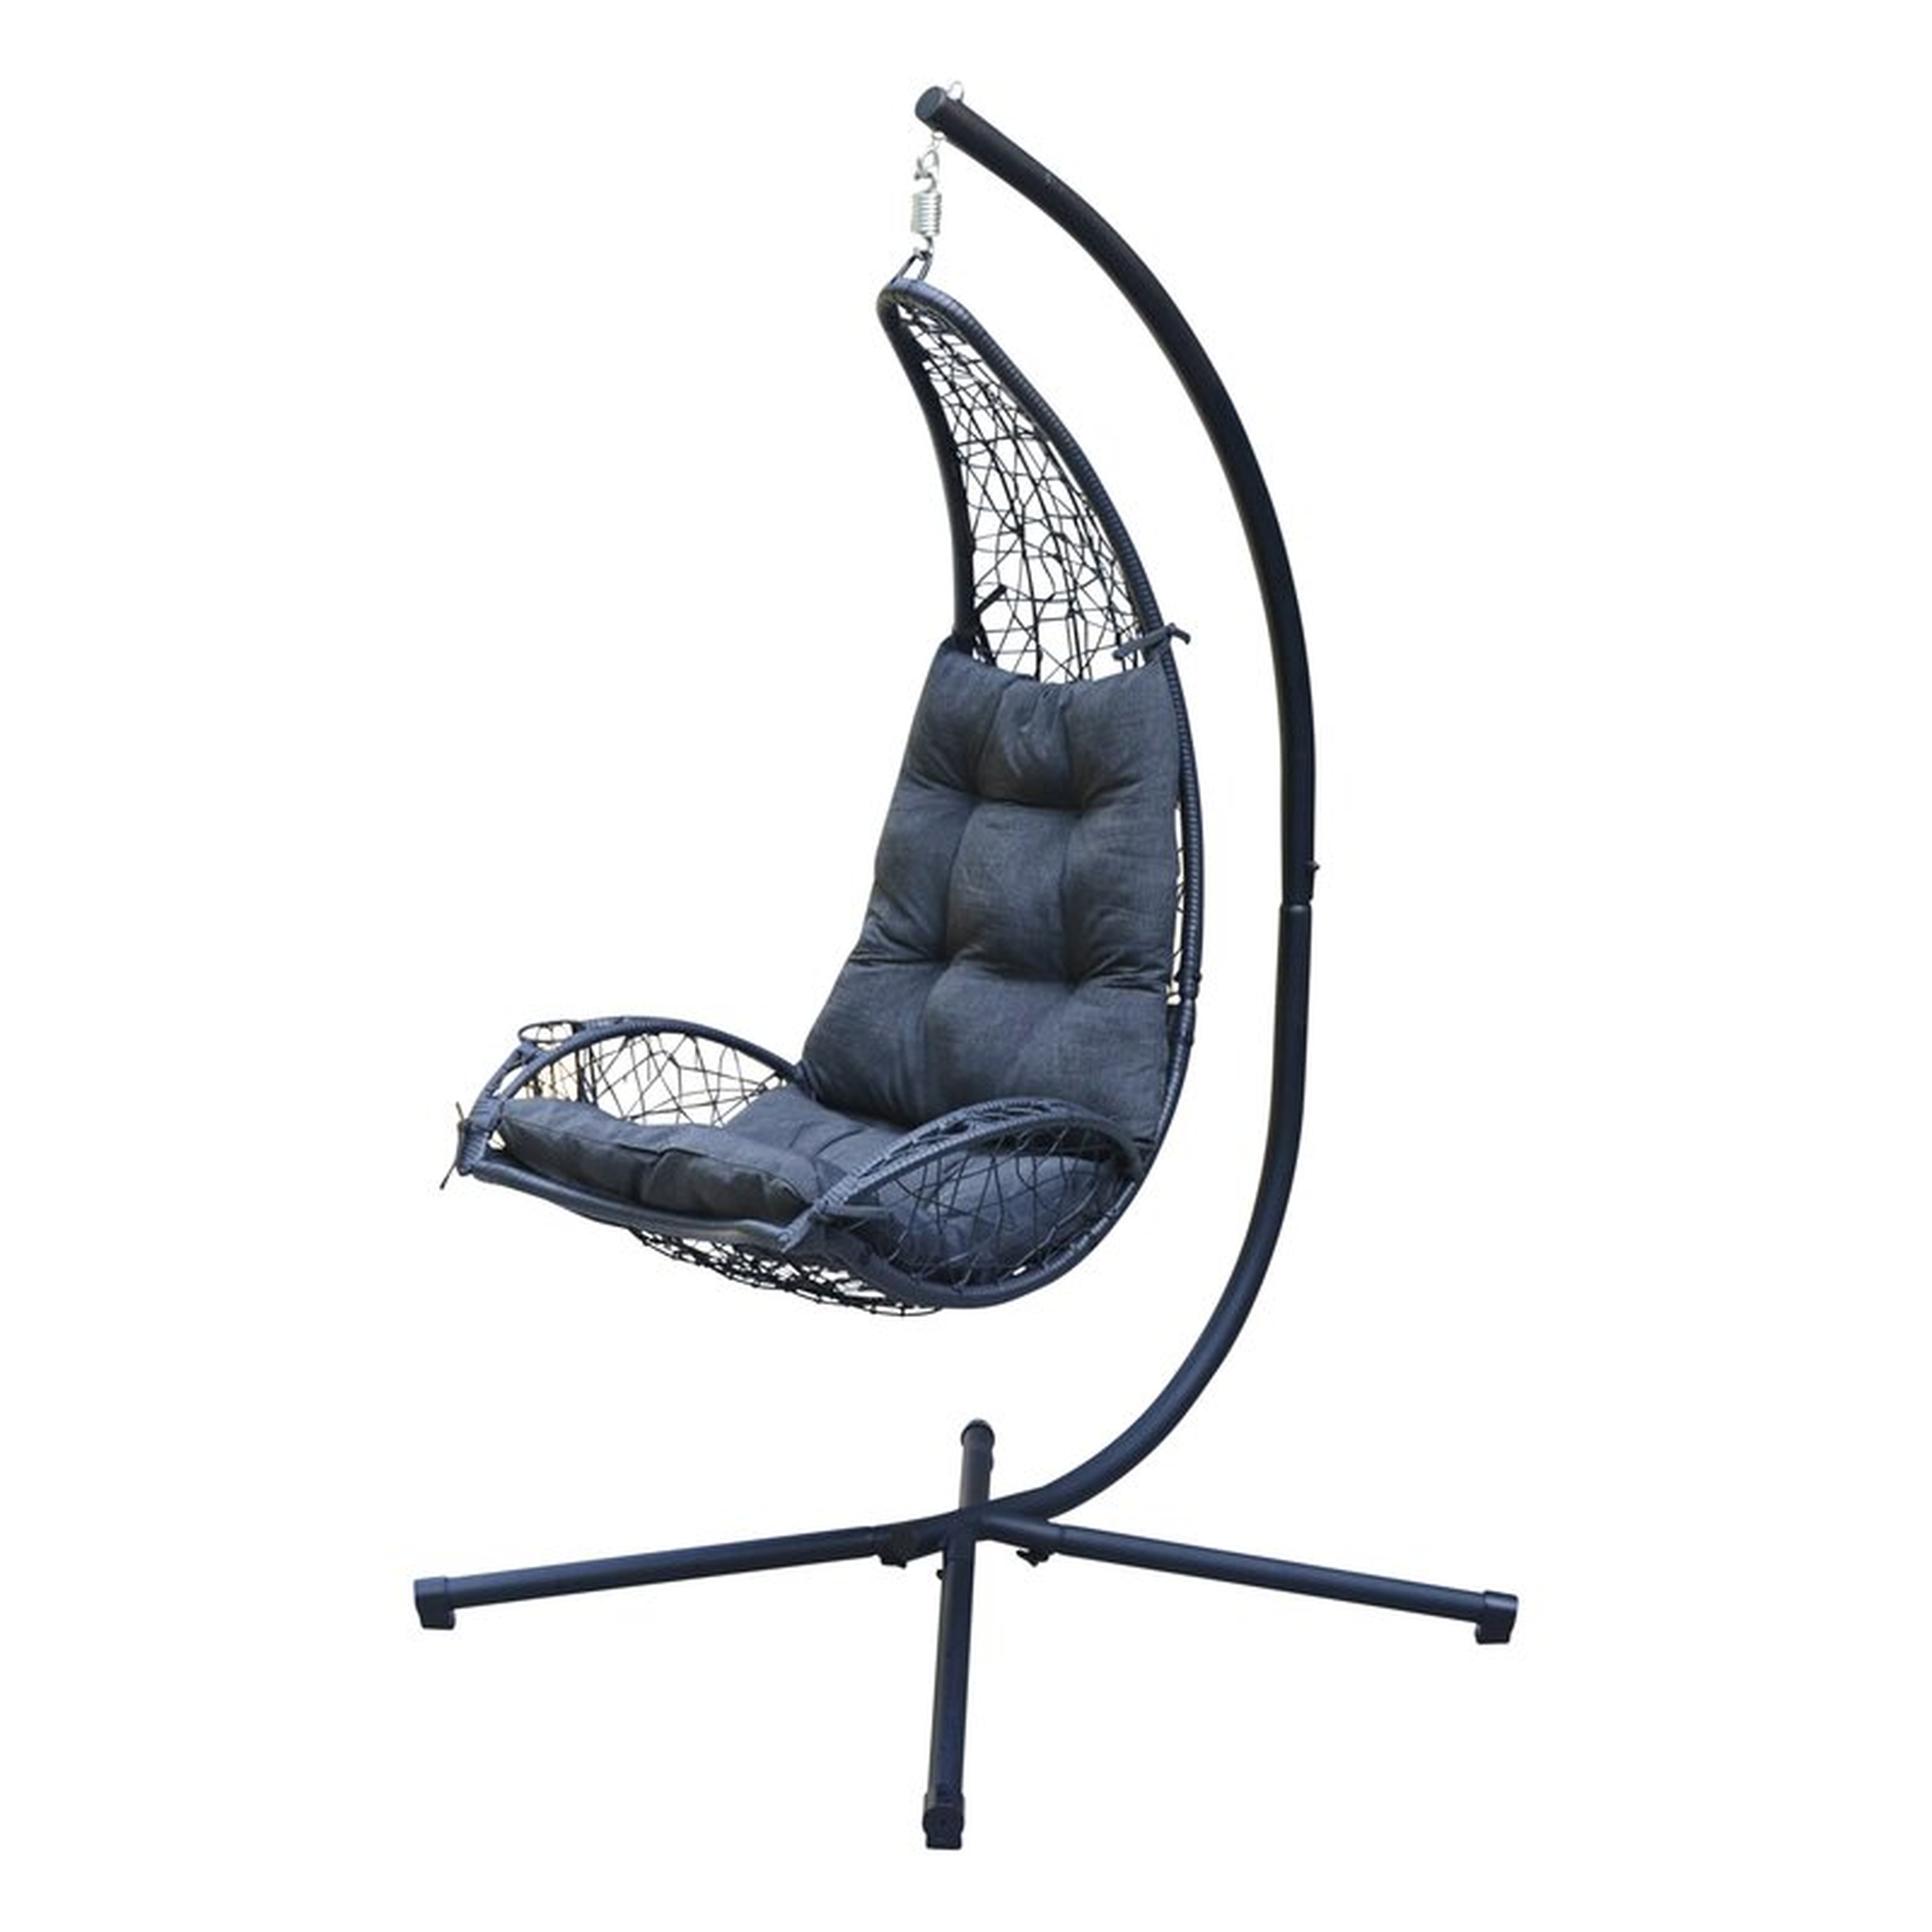 Guerra Swing Chair with Stand - Wayfair